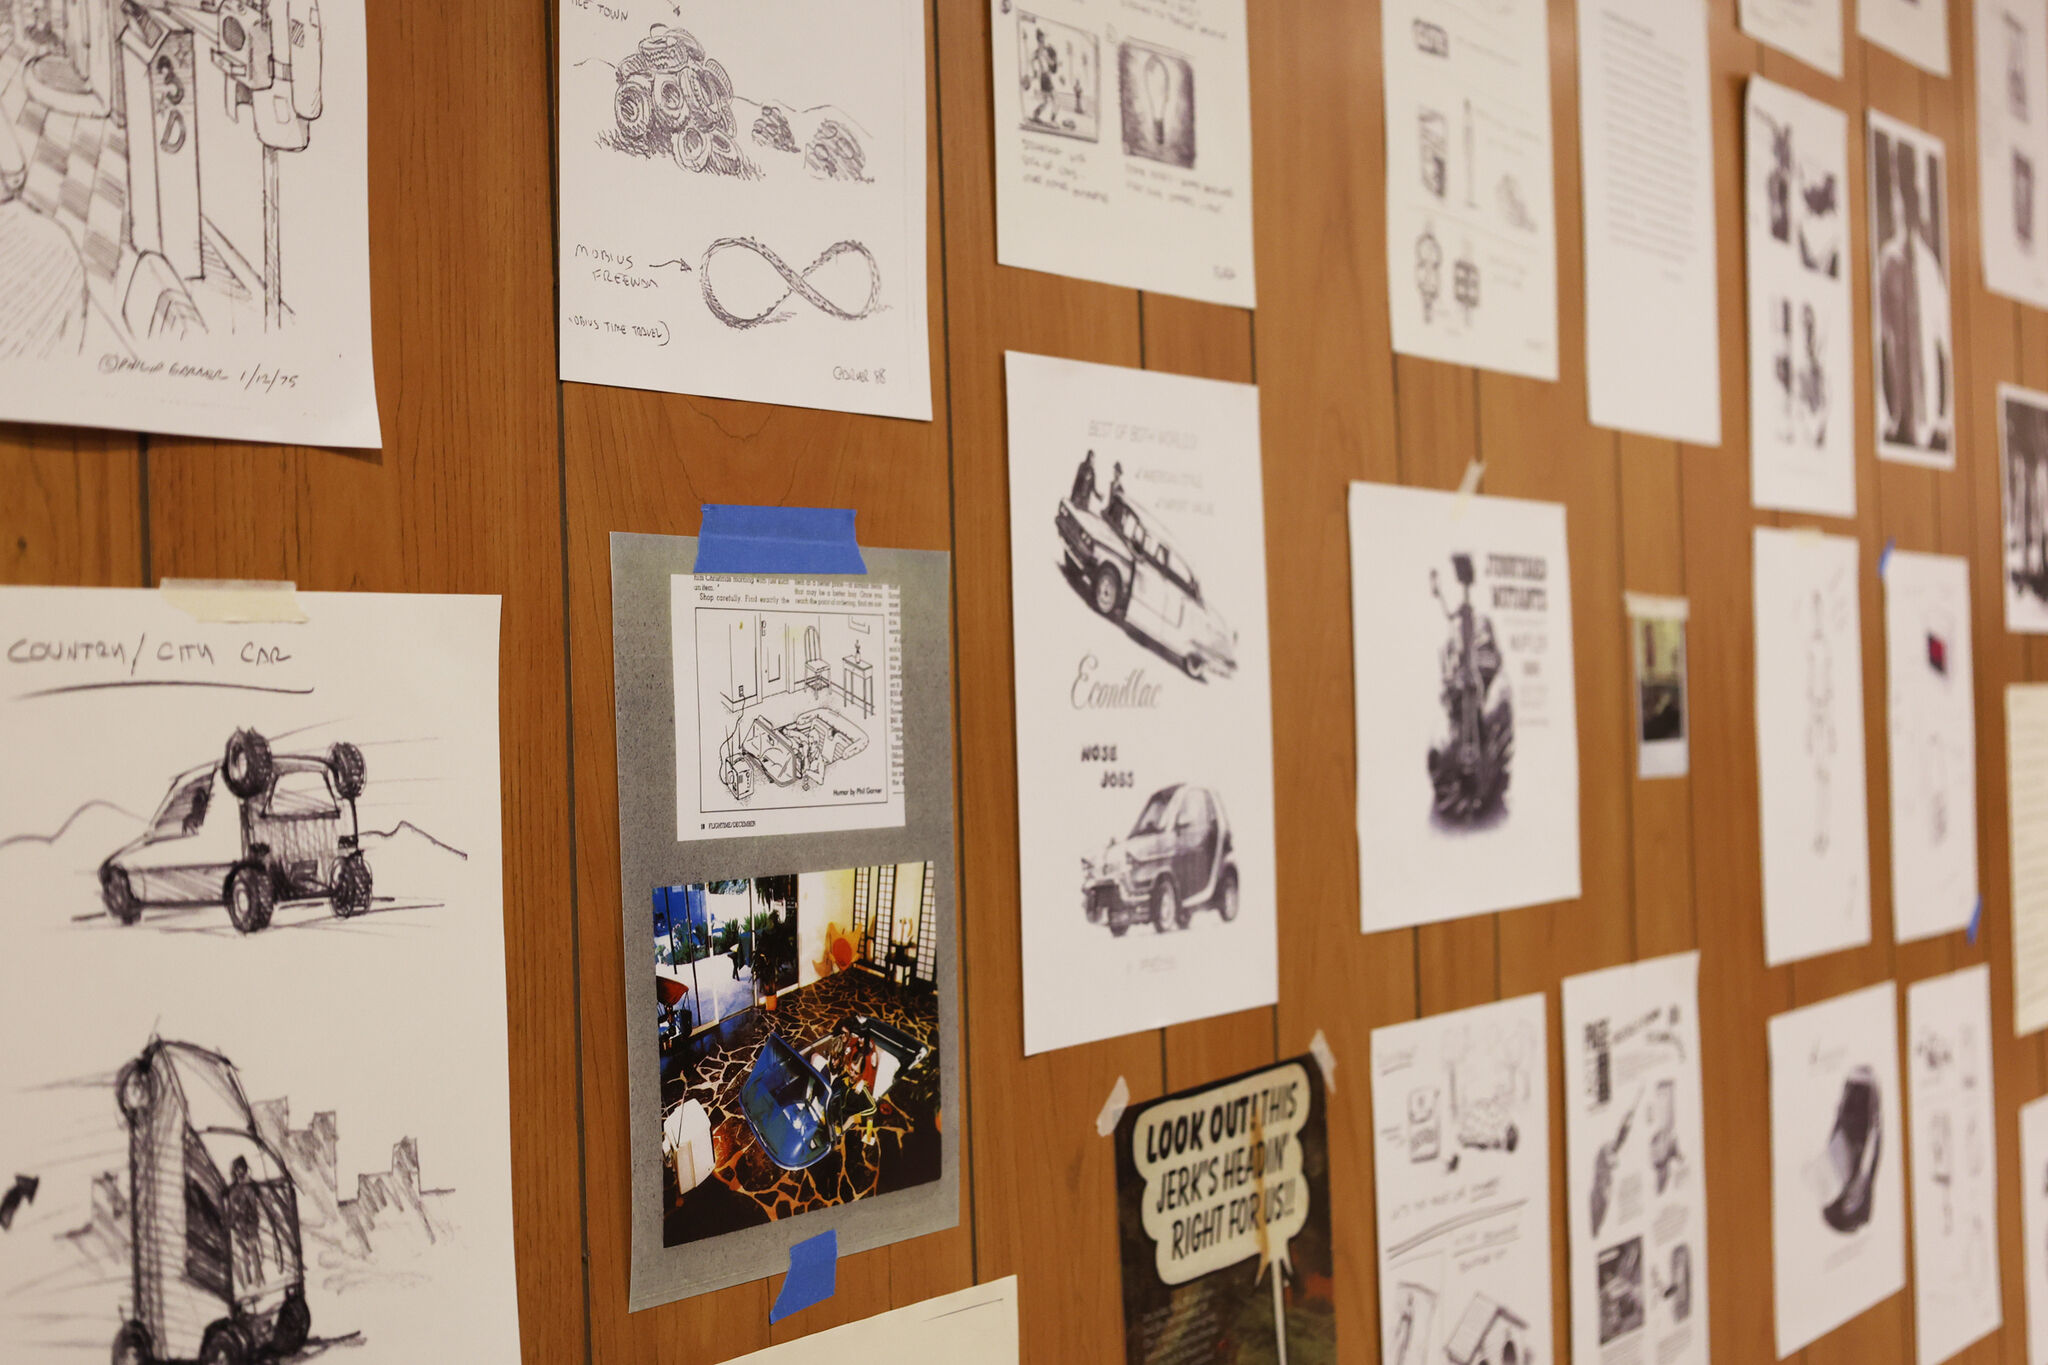 A wood panel wall covered with various sketches and printed images, mostly related to automotive designs and concepts.